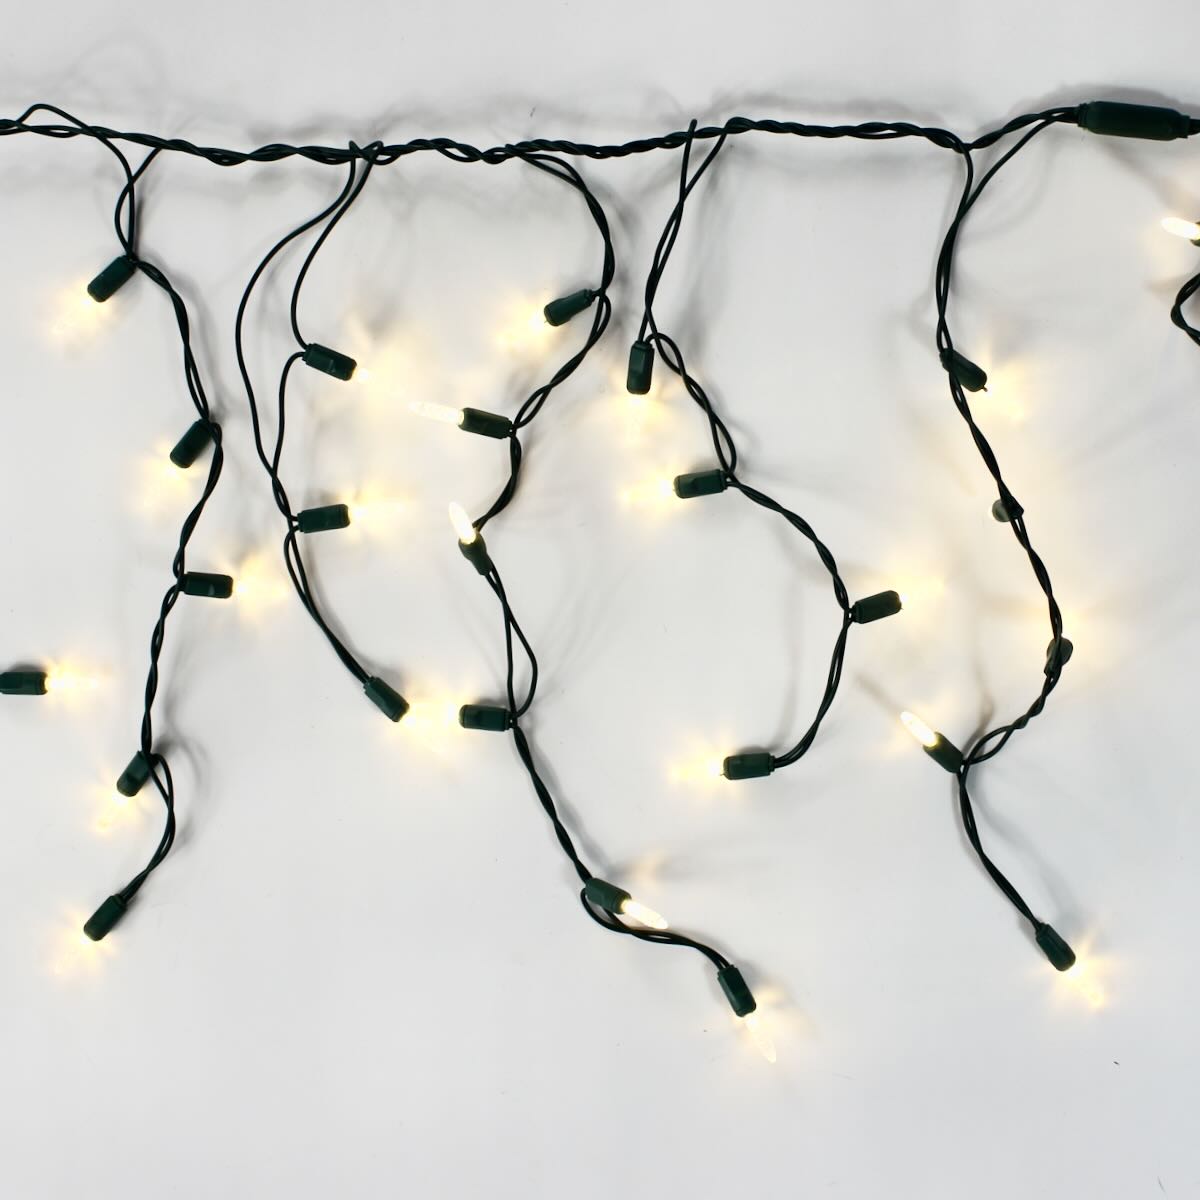 100-light M5 Warm White LED Icicle Lights, Green Wire – Christmas Light ...